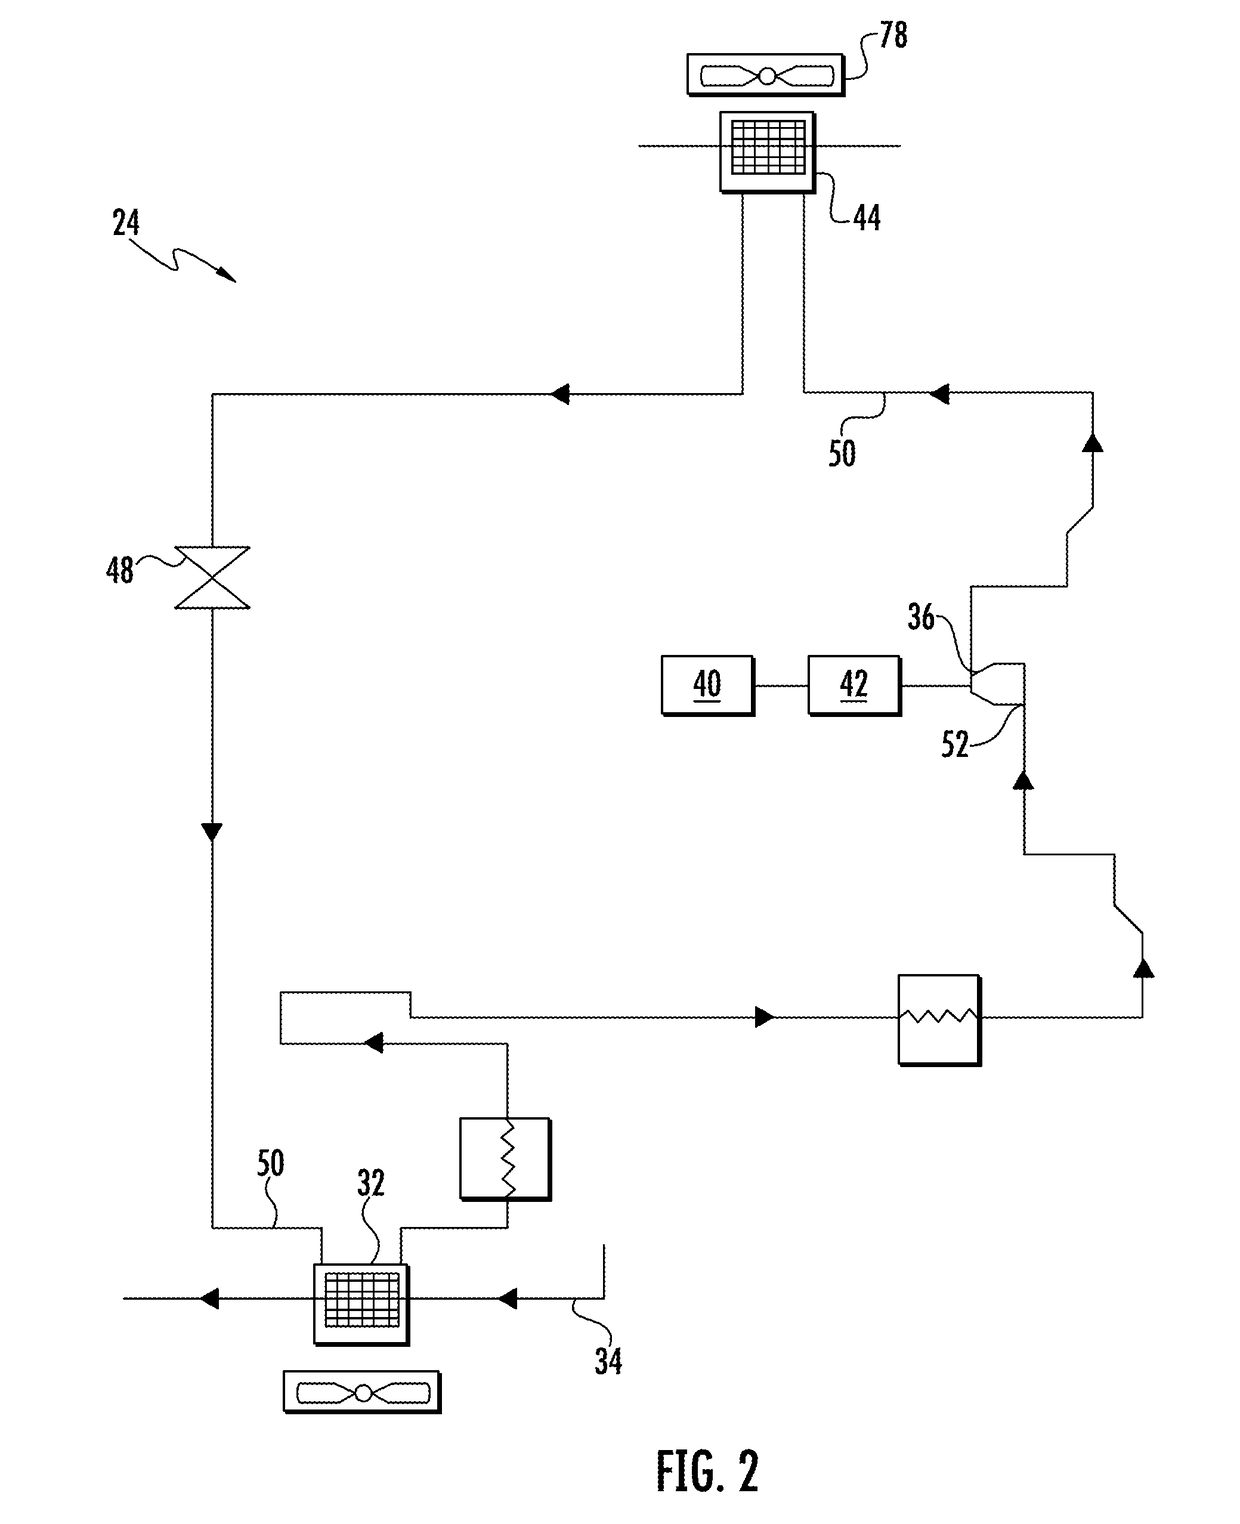 Temperature control of exhaust gas of a transportation refrigeration unit